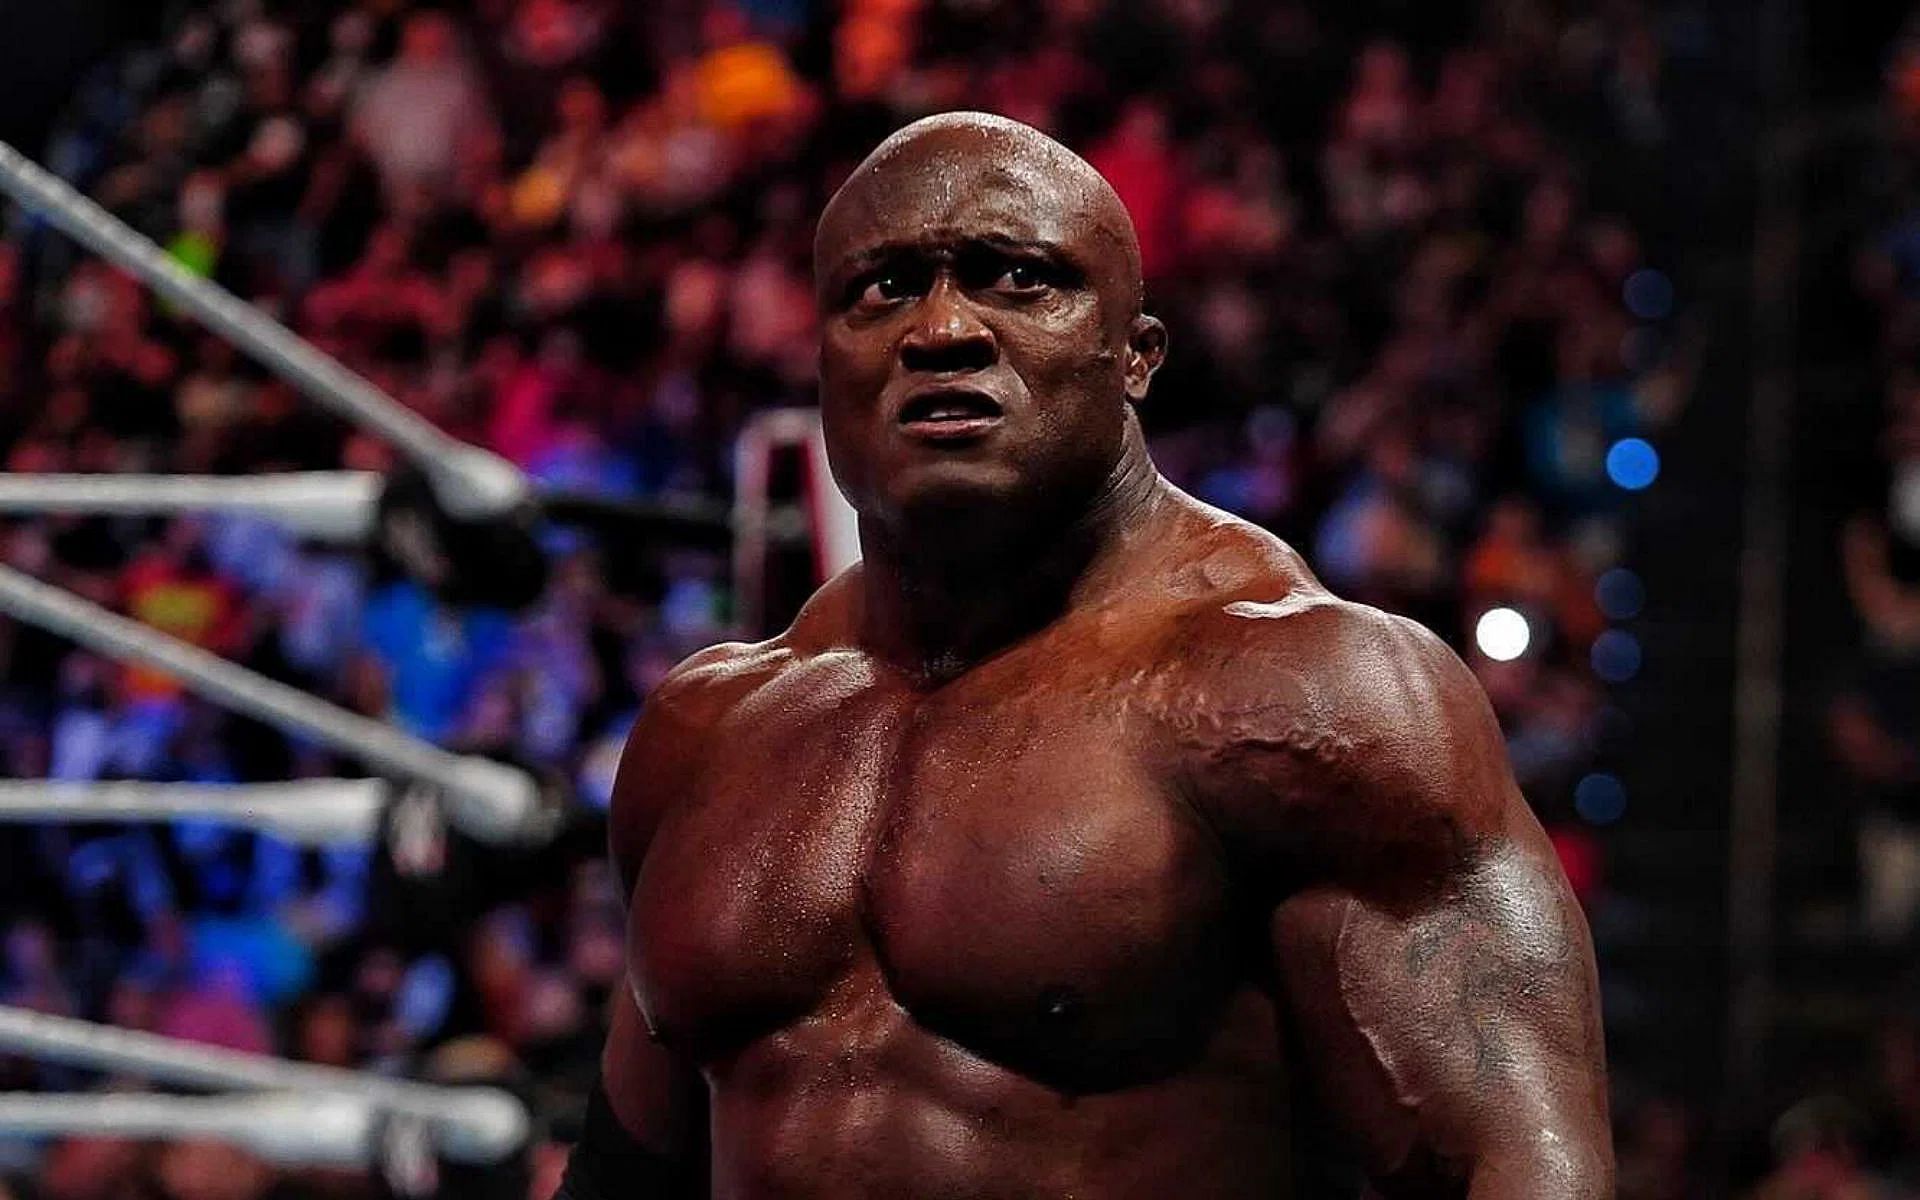 Lashley recently defeated Brock Lesnar at Crown Jewel.